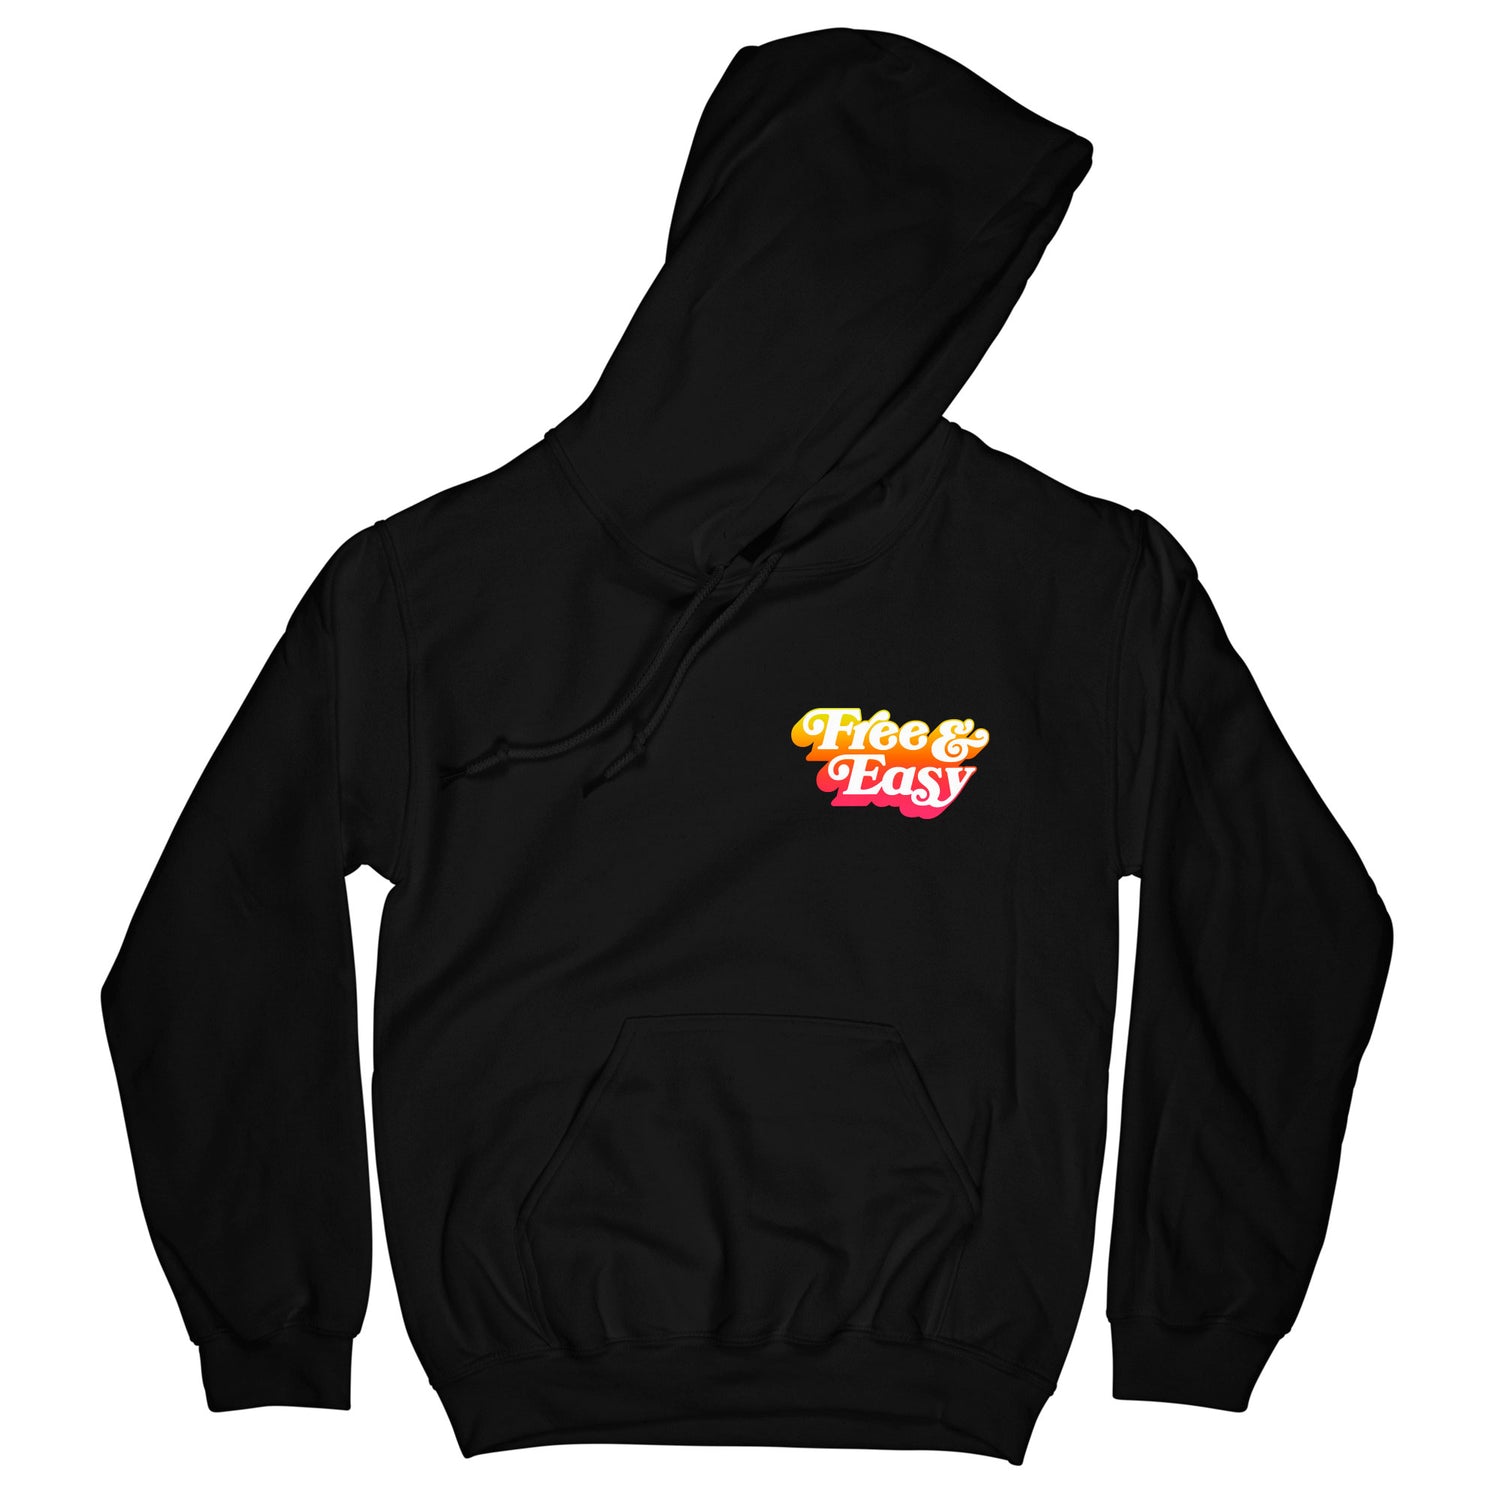 Don't Trip OG Hoodie in black with multicolor gradient Free & Easy logo design on front left side on a white background - Free & Easy